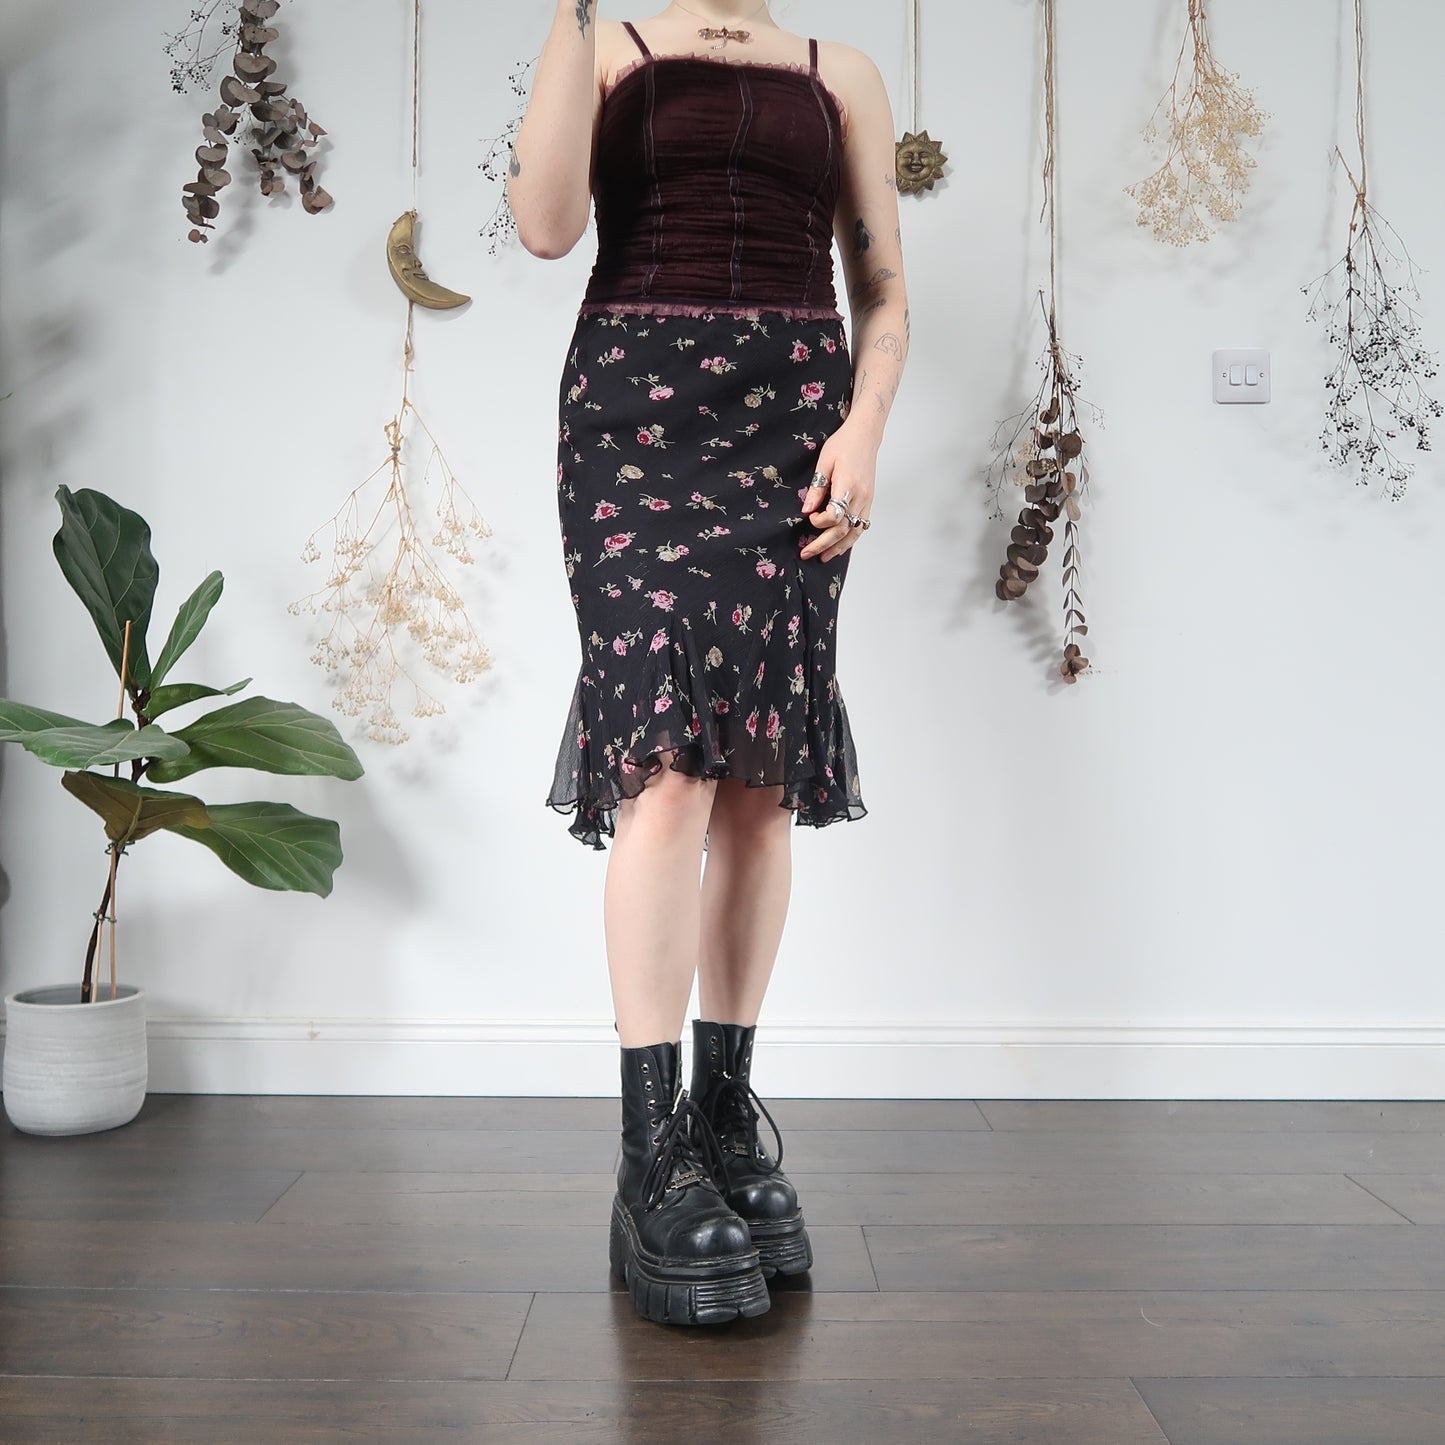 Floral silk skirt - size XS/S